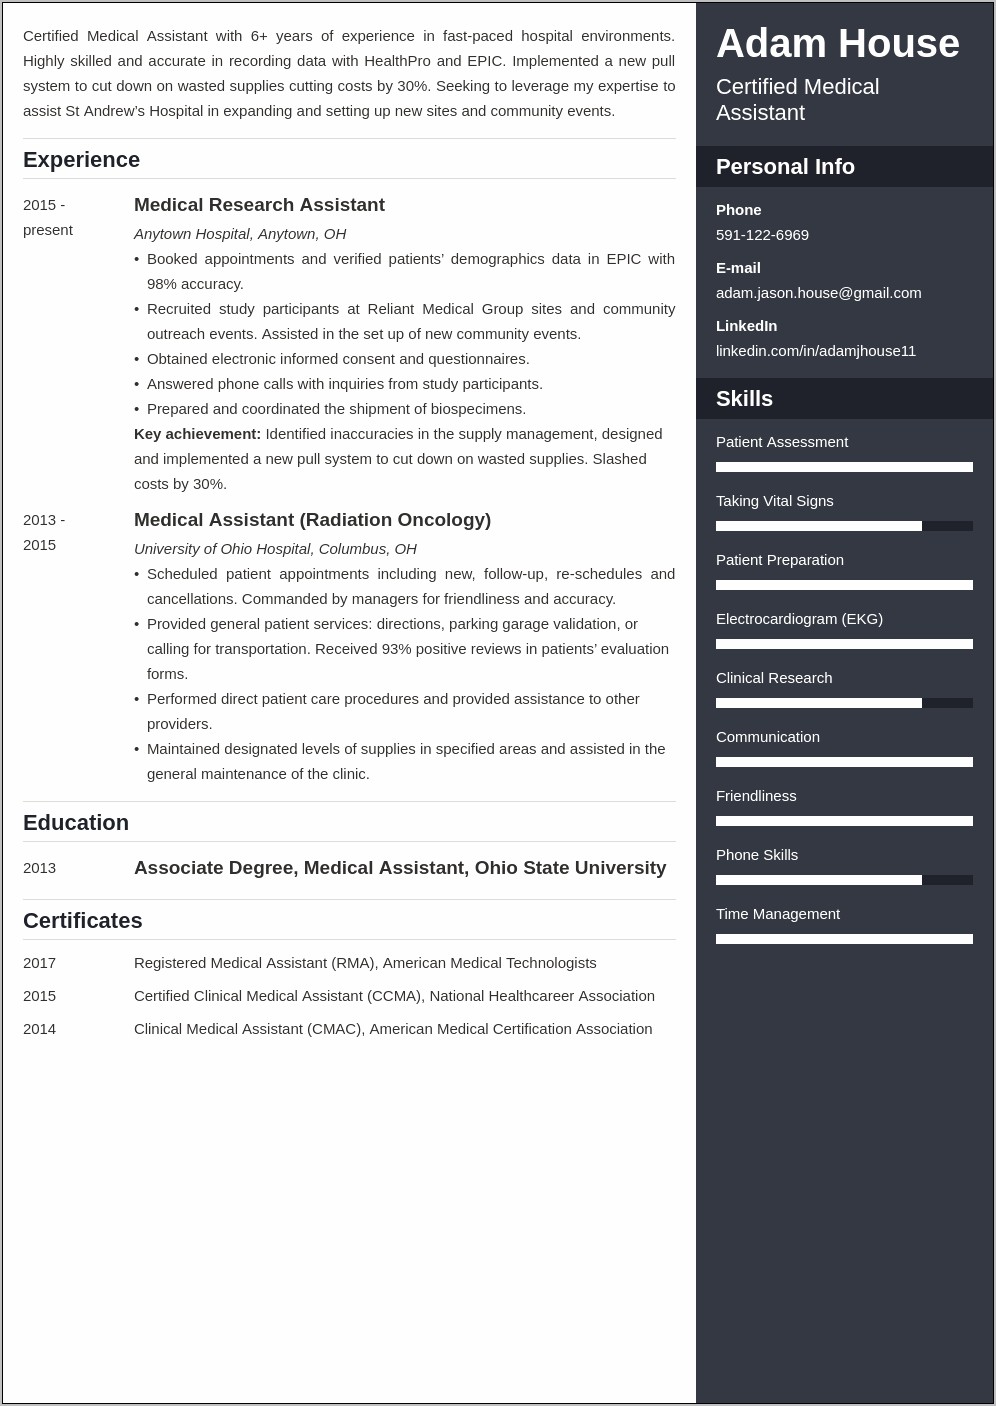 Resume For Medical Assistant Jobs